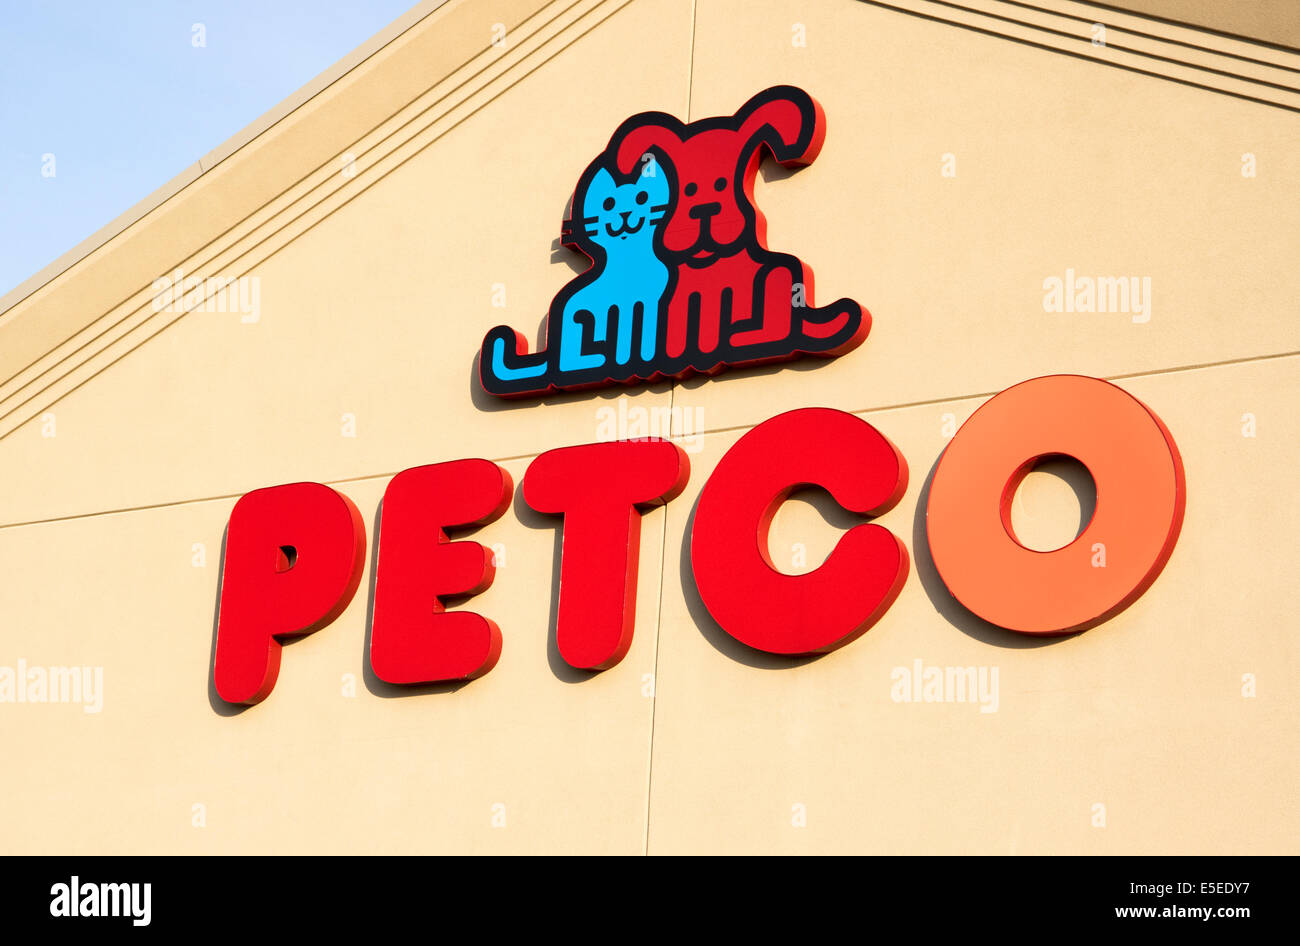 Petco logo on store in retail mall Stock Photo